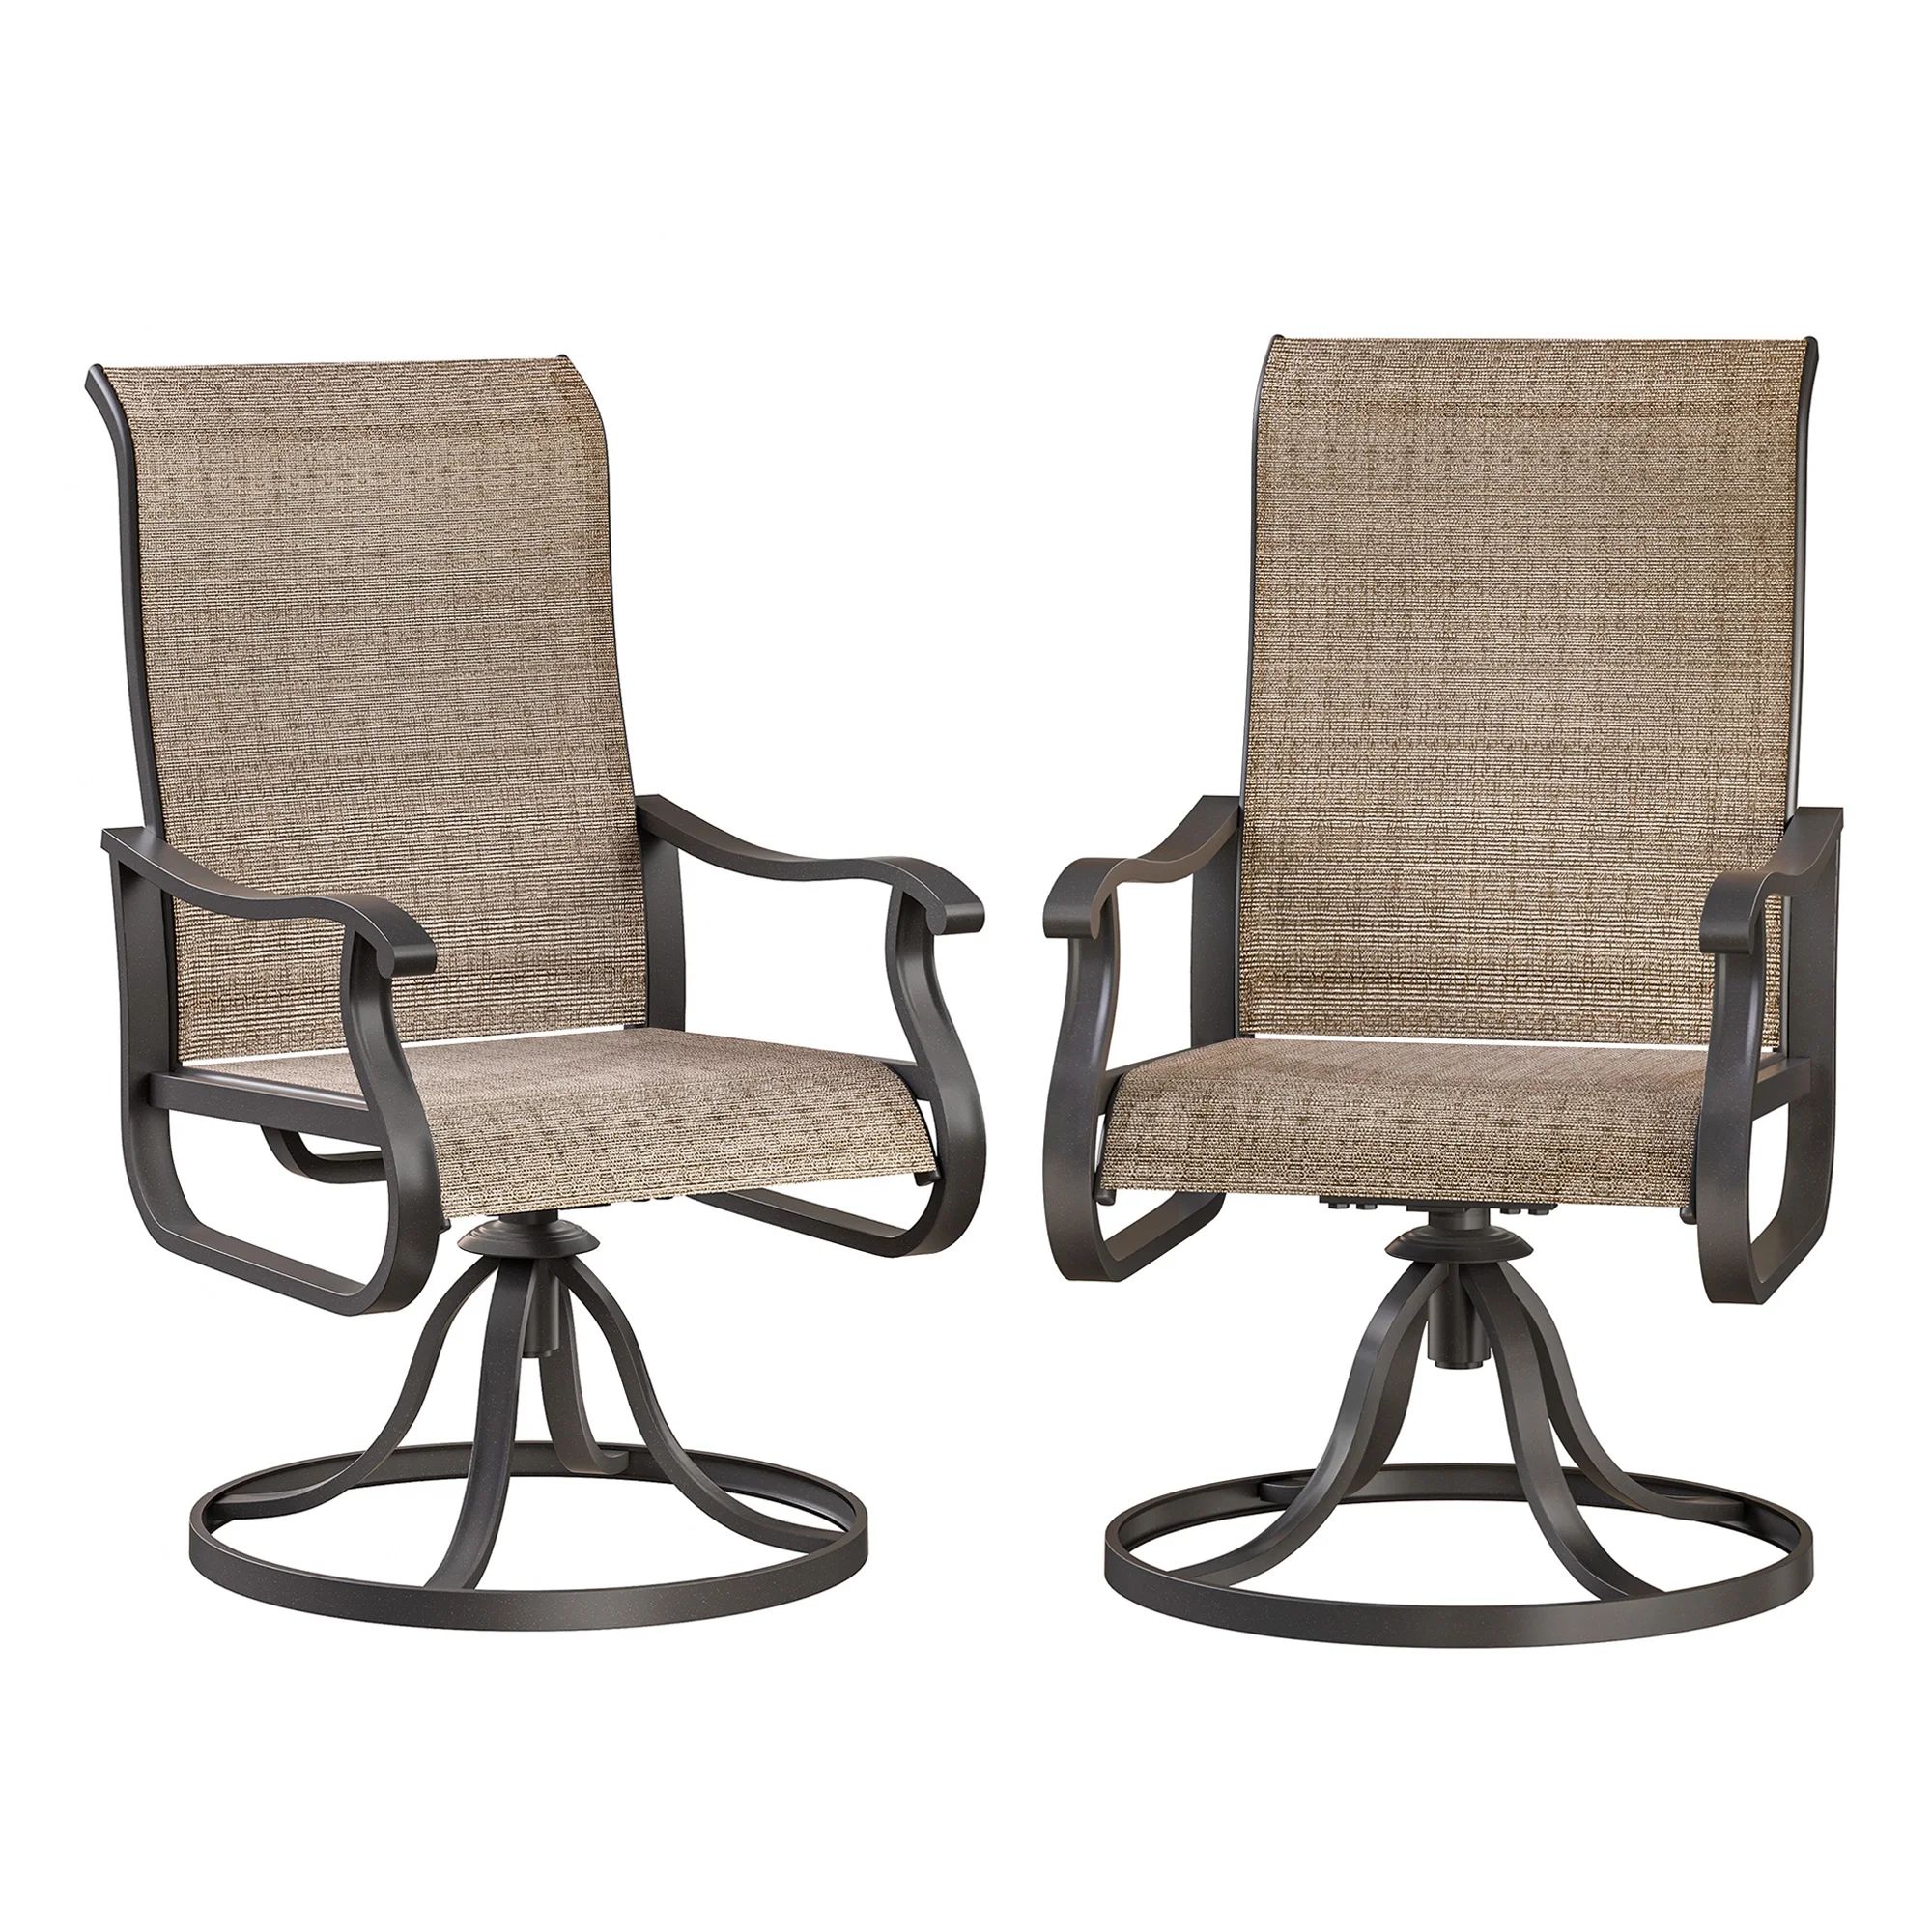 ELPOSUN Patio Swivel Chairs Set of 2, Outdoor Dining Chairs High Back All Weather Breathable Text... | Walmart (US)